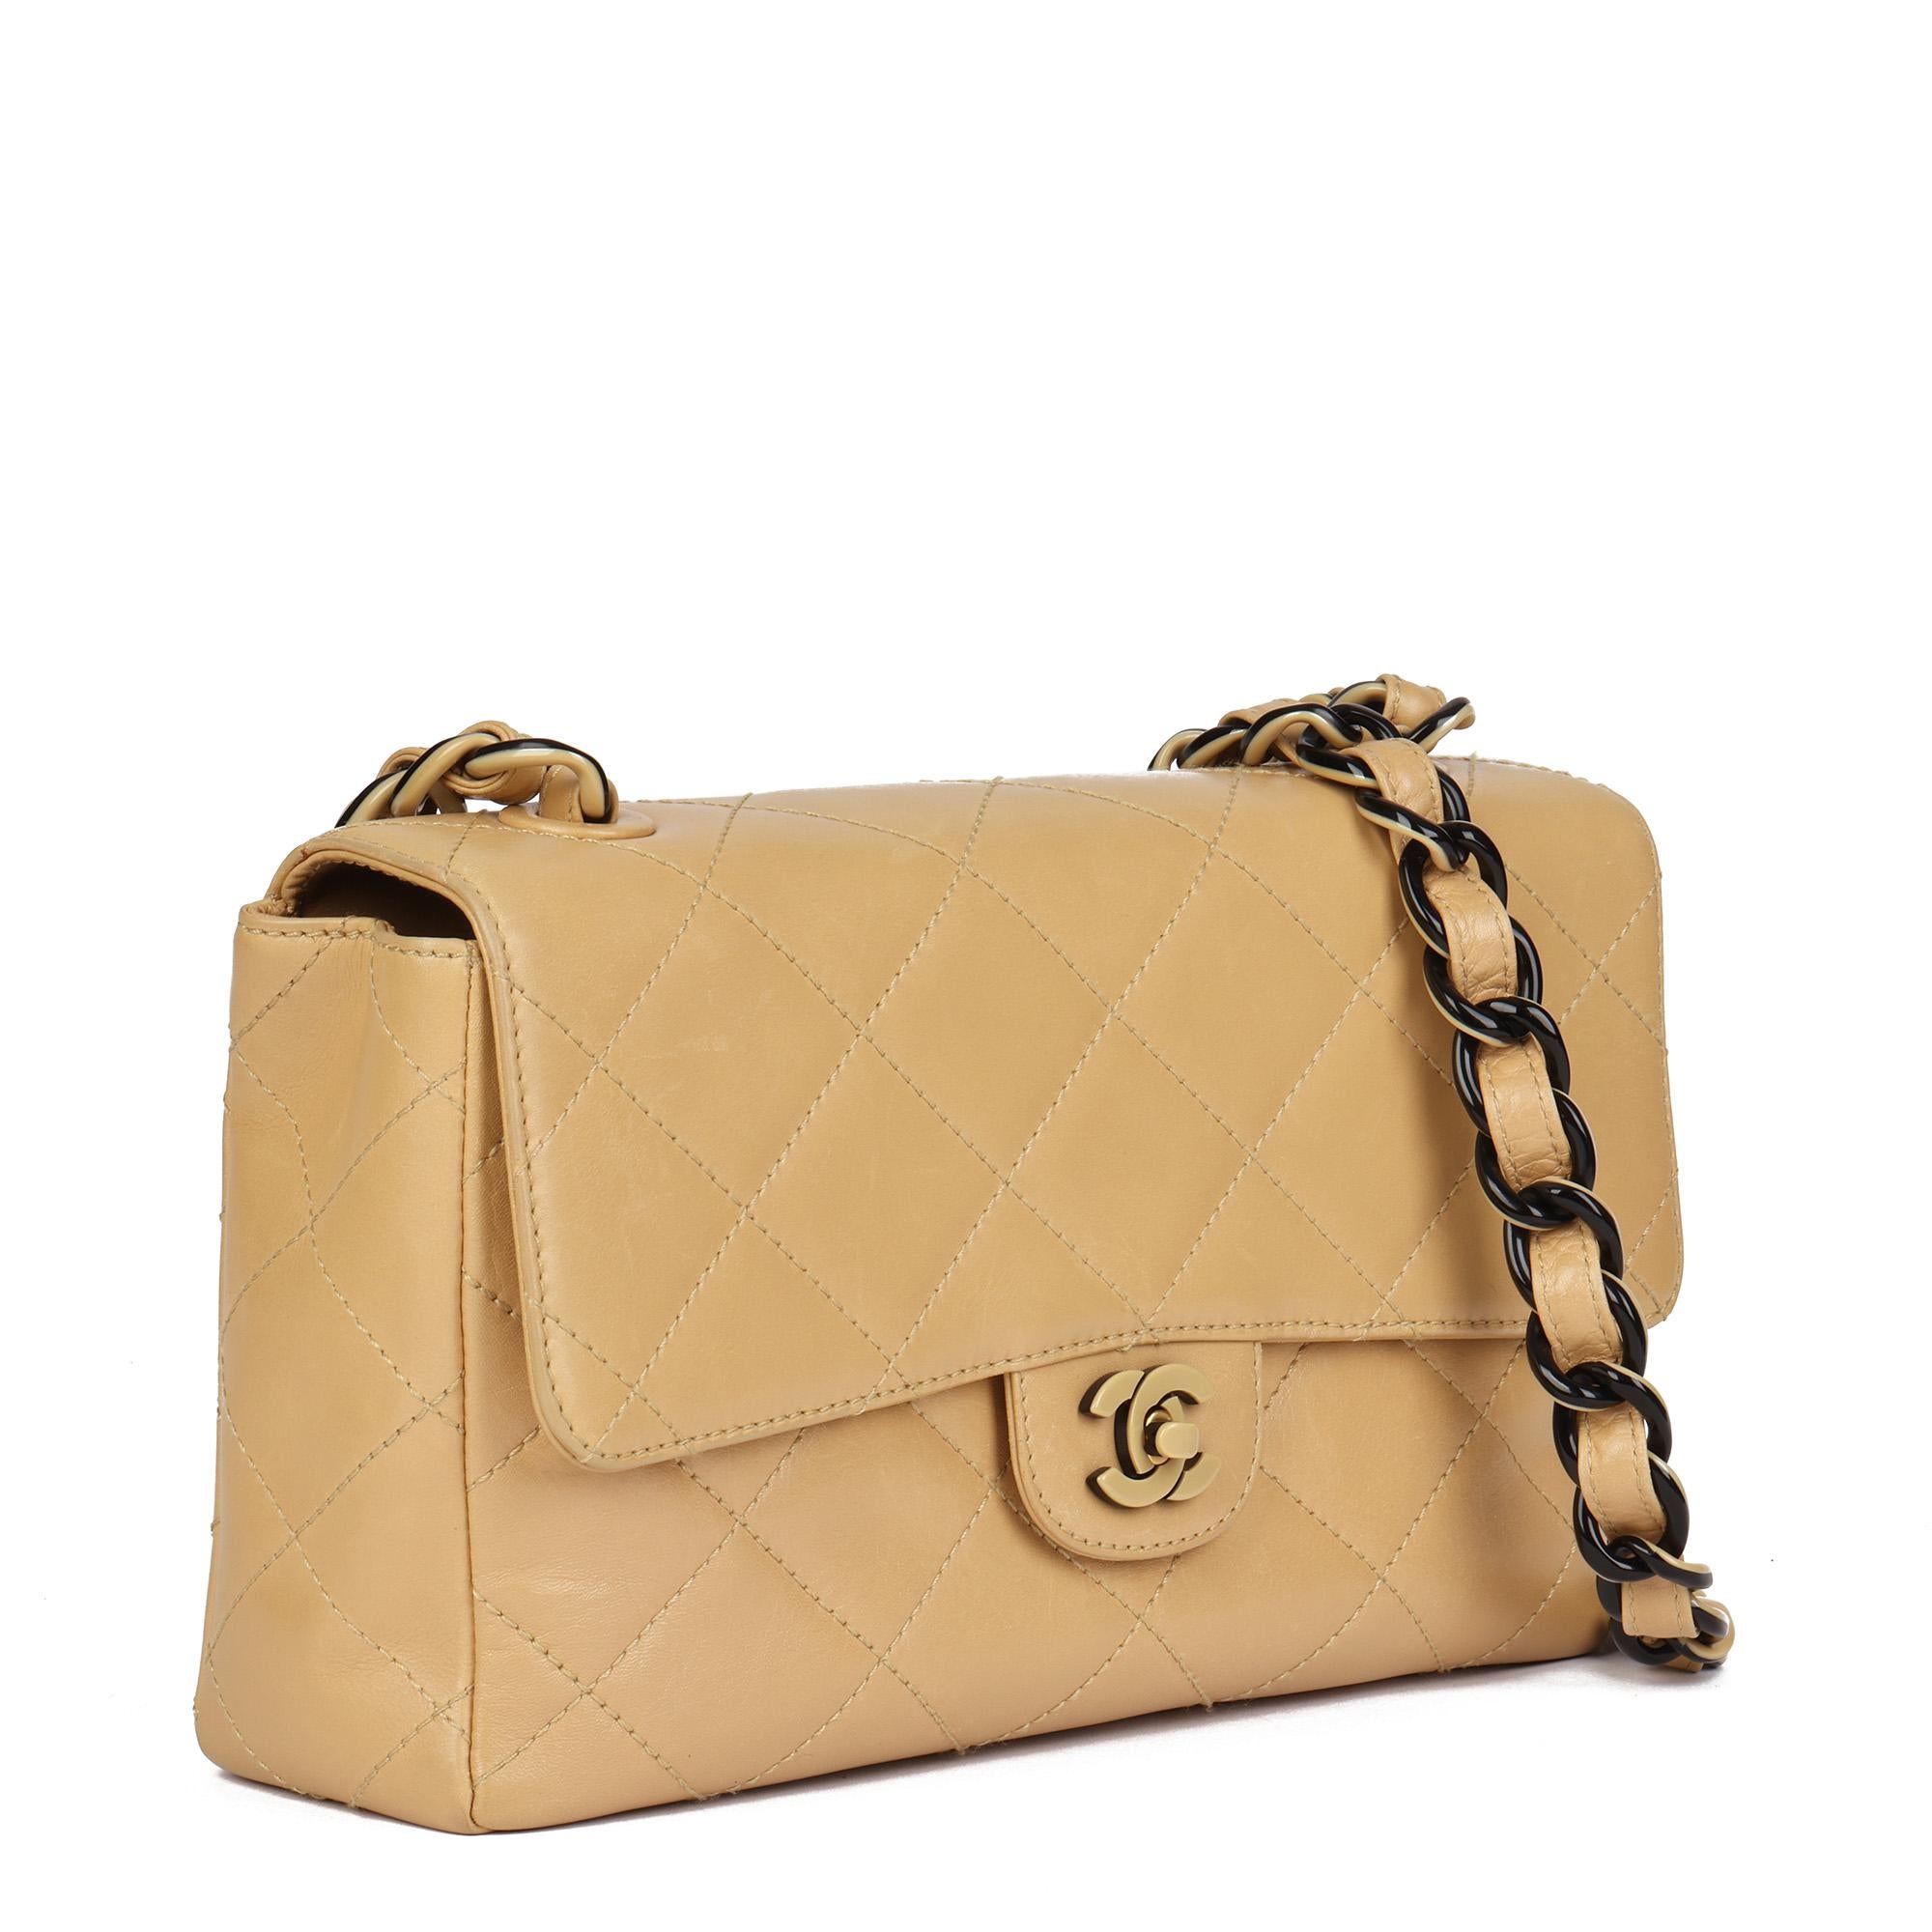 CHANEL
Beige Quilted Lambskin Vintage Medium Classic Single Flap Bag

Serial Number: 6496657
Age (Circa): 2000
Authenticity Details: Serial Sticker (Made in Italy)
Gender: Ladies
Type: Shoulder, Crossbody

Colour: Beige
Hardware: Black & Beige